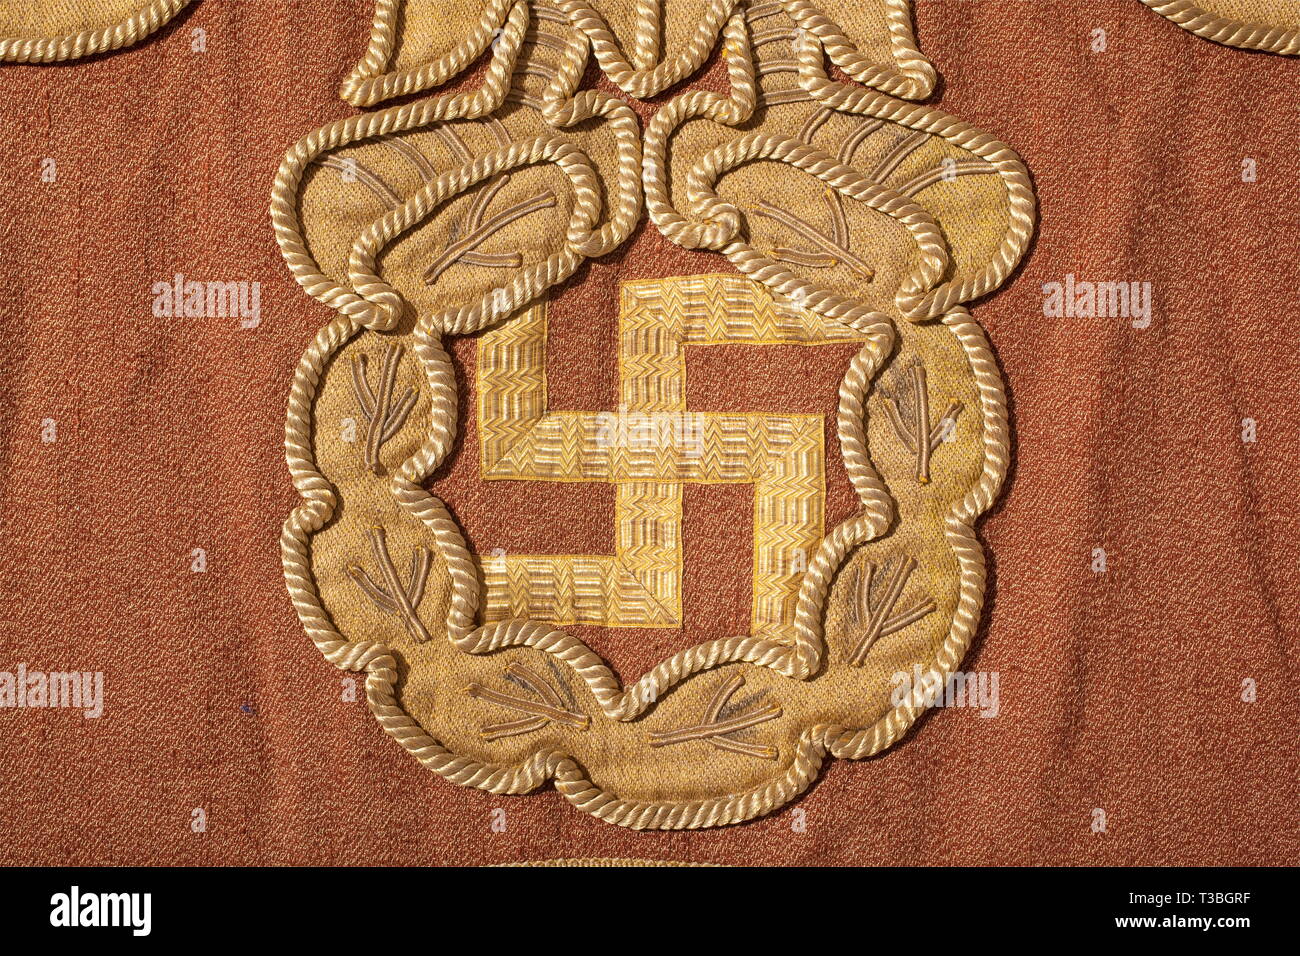 A decorative hanging for a parade float, in the procession '2000 Years of German Culture' in Munich 1938 Heavy cotton interwoven with gold and bearing an applied, gold coloured national eagle emblem outlined with gold cord on an oak leaf wreath. The swastika applied with gold braid, meander bordering on the sides. Forged iron suspension rings probably of later date. 130 x 215 cm. Probably a parade float banner of the 'Neue Zeit' ('New Era'). Cf. other decorative hangings of this kind in '2000 Jahre Deutsche Kultur', Bayerland Verlag, Munich 1938, p. 31 and in 'Festtage in M, Editorial-Use-Only Stock Photo